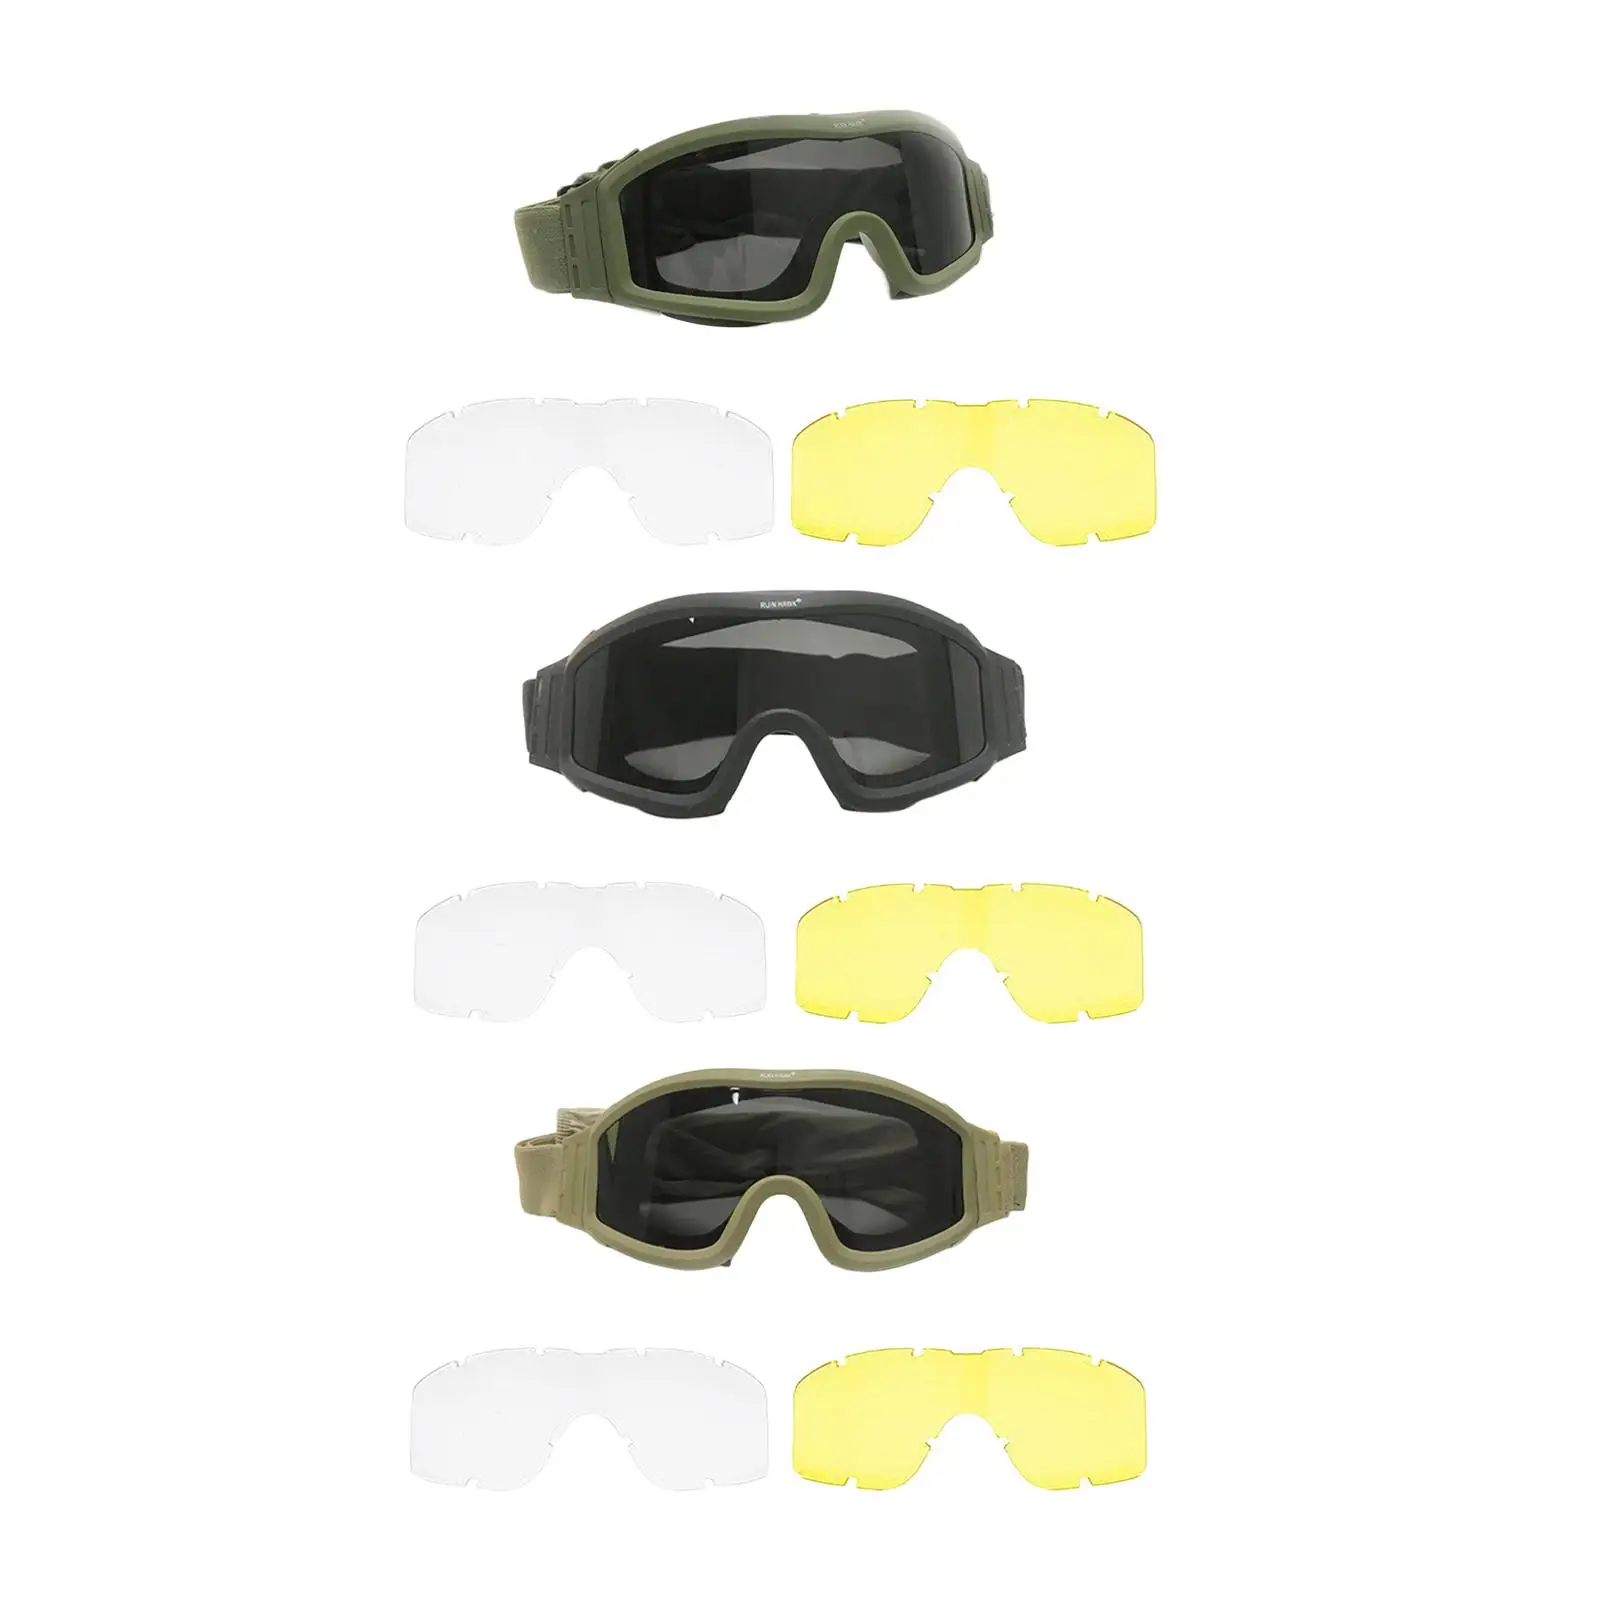 3 Lens Goggles Glasses Windproof Outdoor Adjustable Scratch Resistant Anti UV for Desert Biking Hunting Mountaineering Shooting